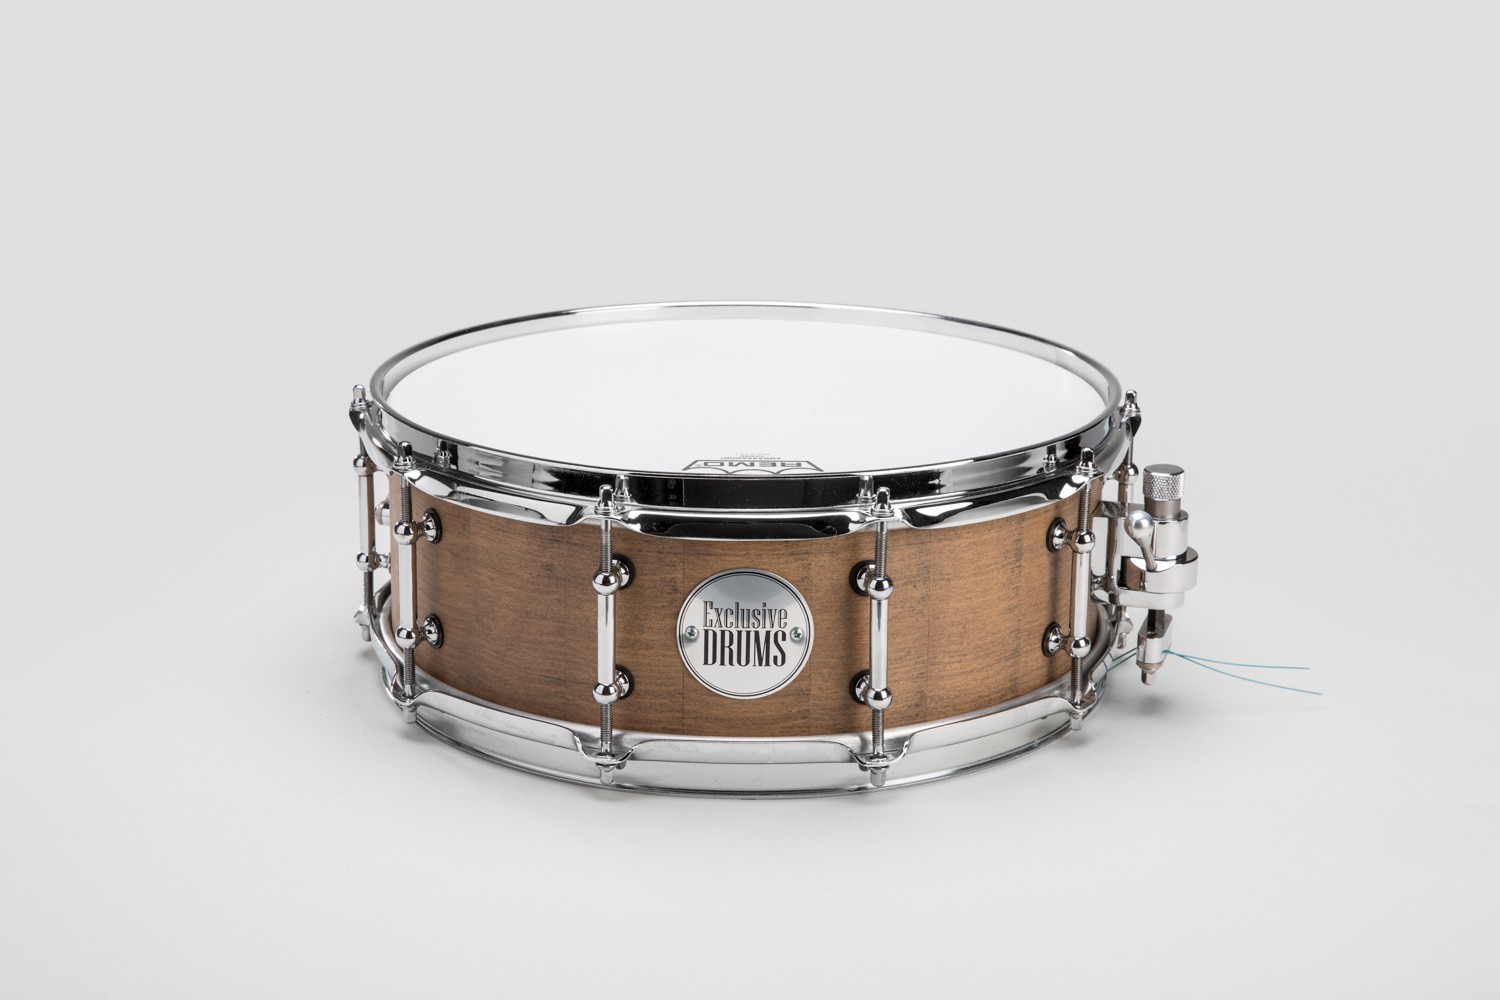 Beuk 14" x 5" Snare drum 